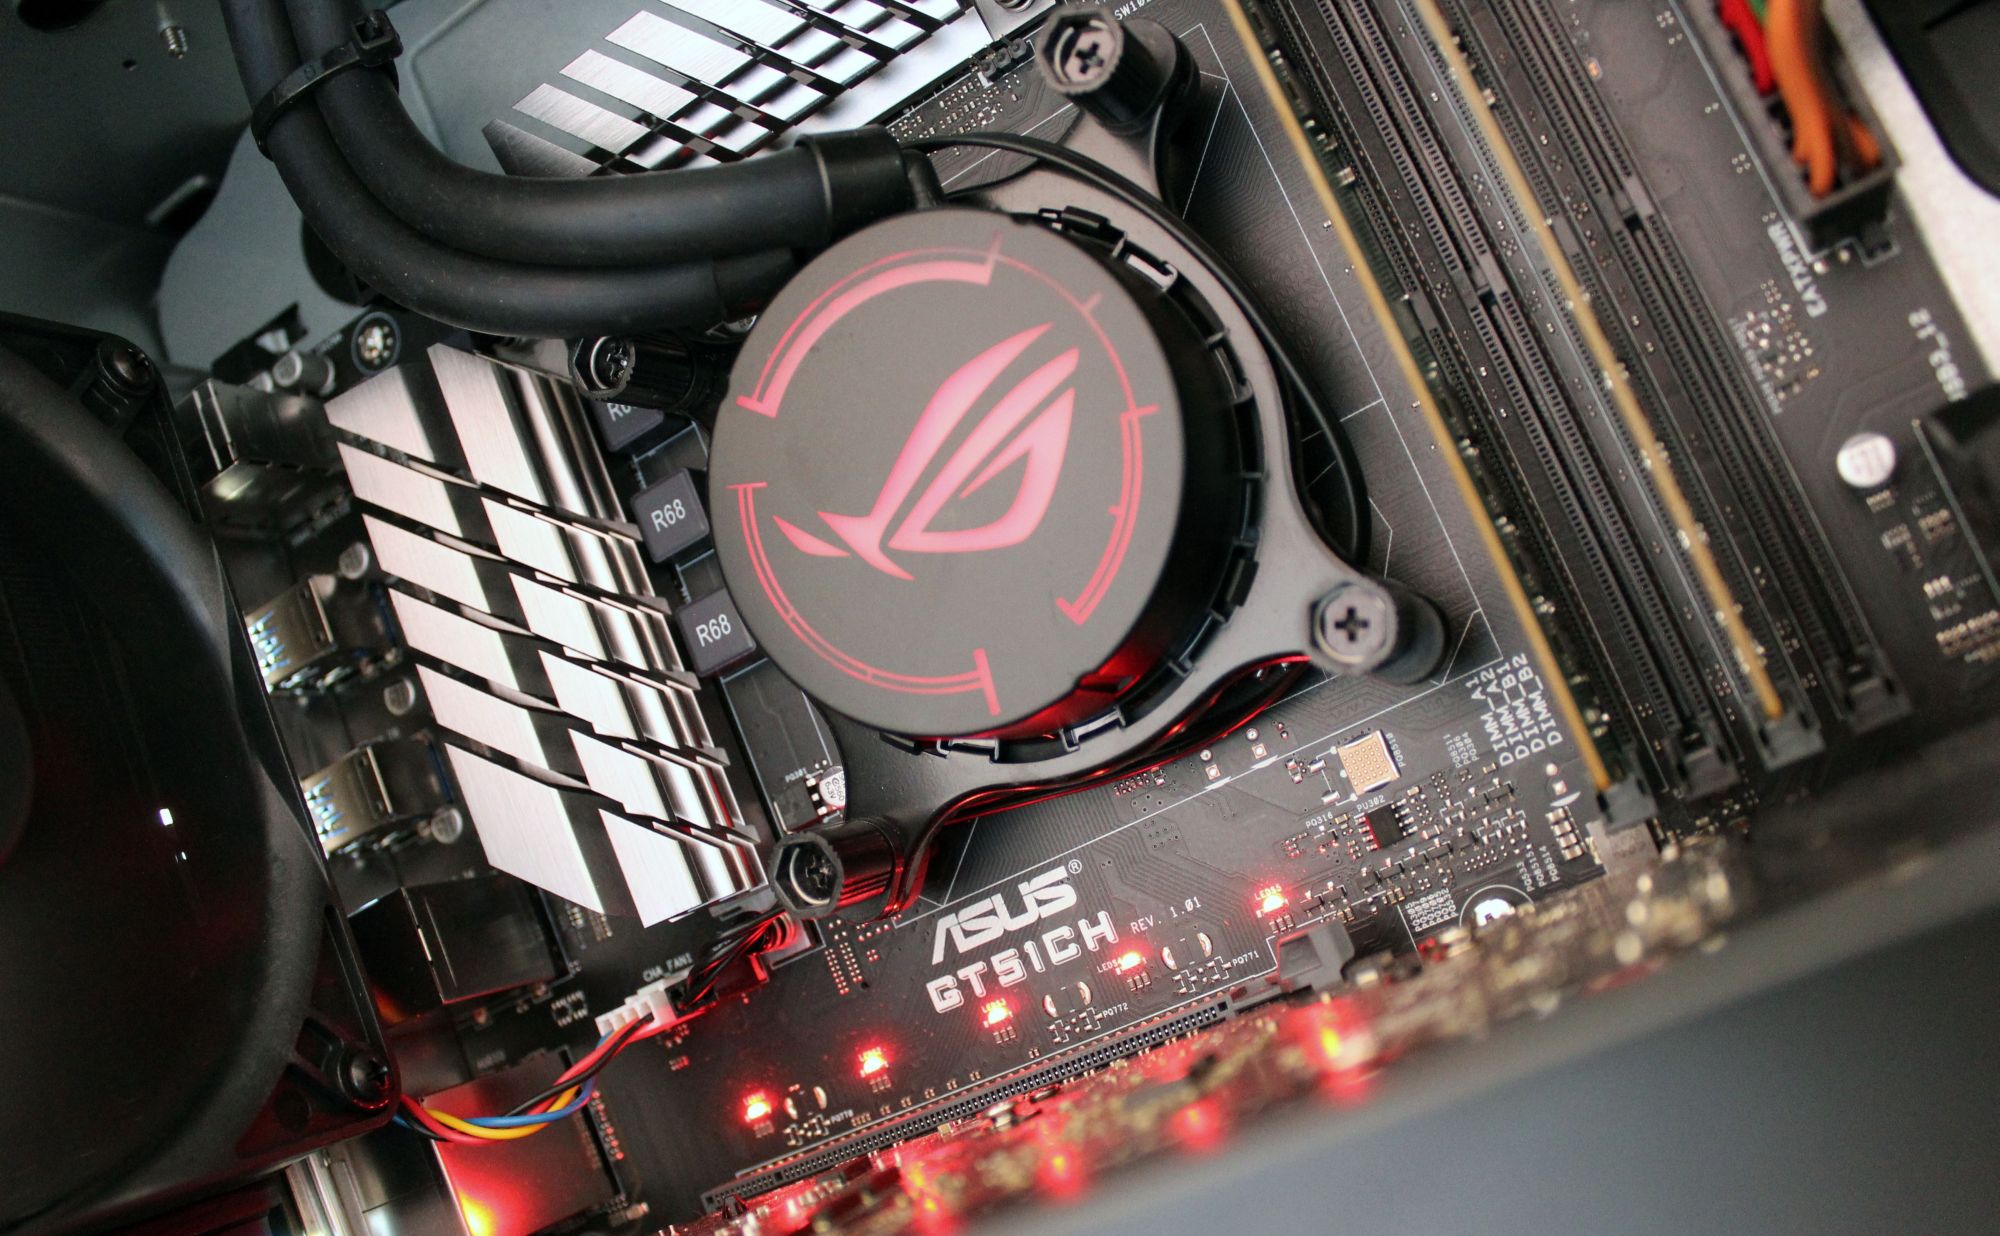 Asus ROG GT51CH motherboard and cooling system close-up.